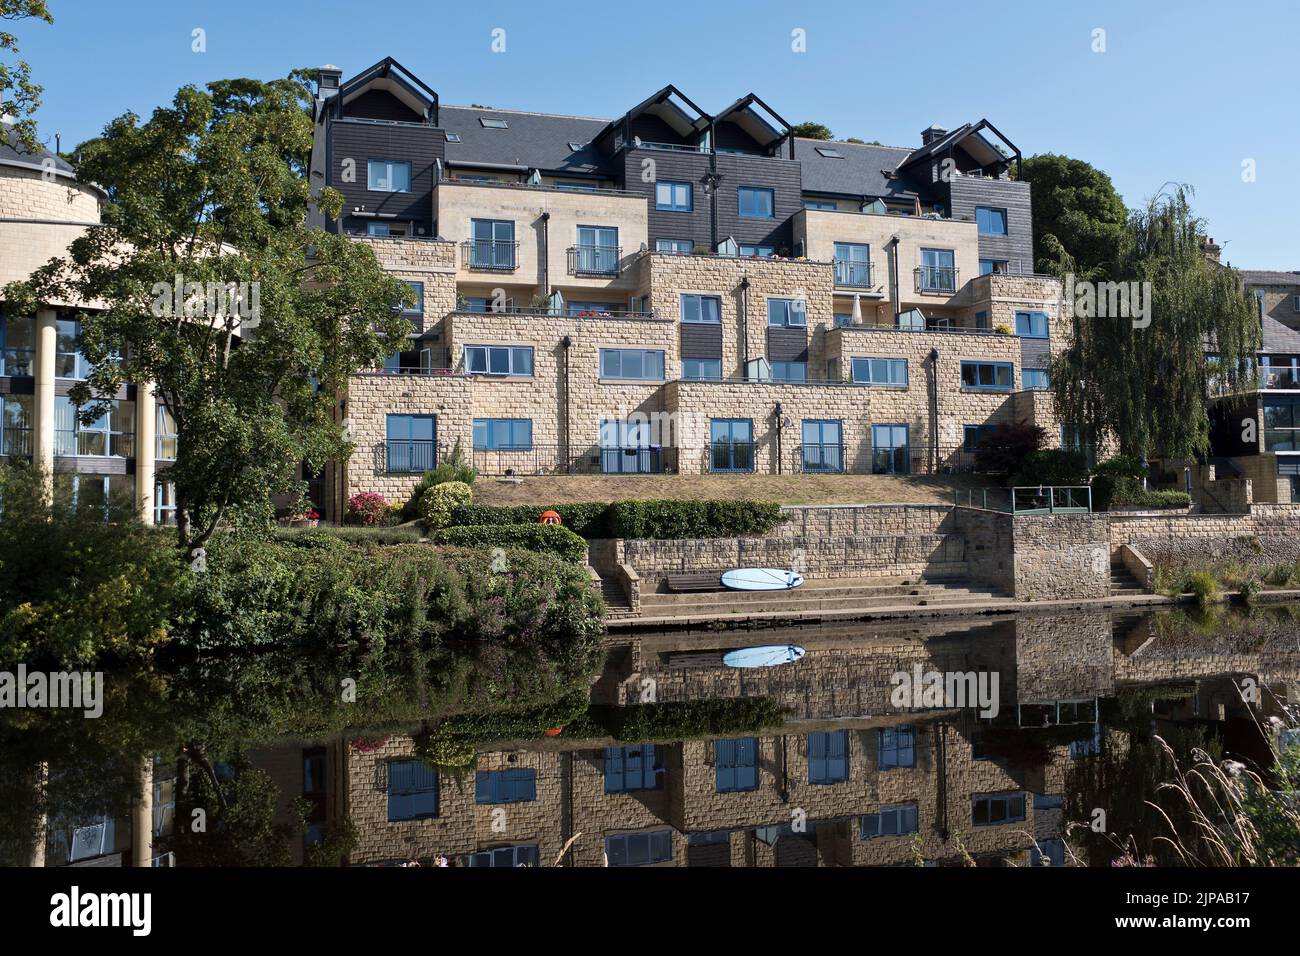 dh River Wharfe WETHERBY WEST YORKSHIRE Riverside apartments modern flats exterior rivers england uk Stock Photo